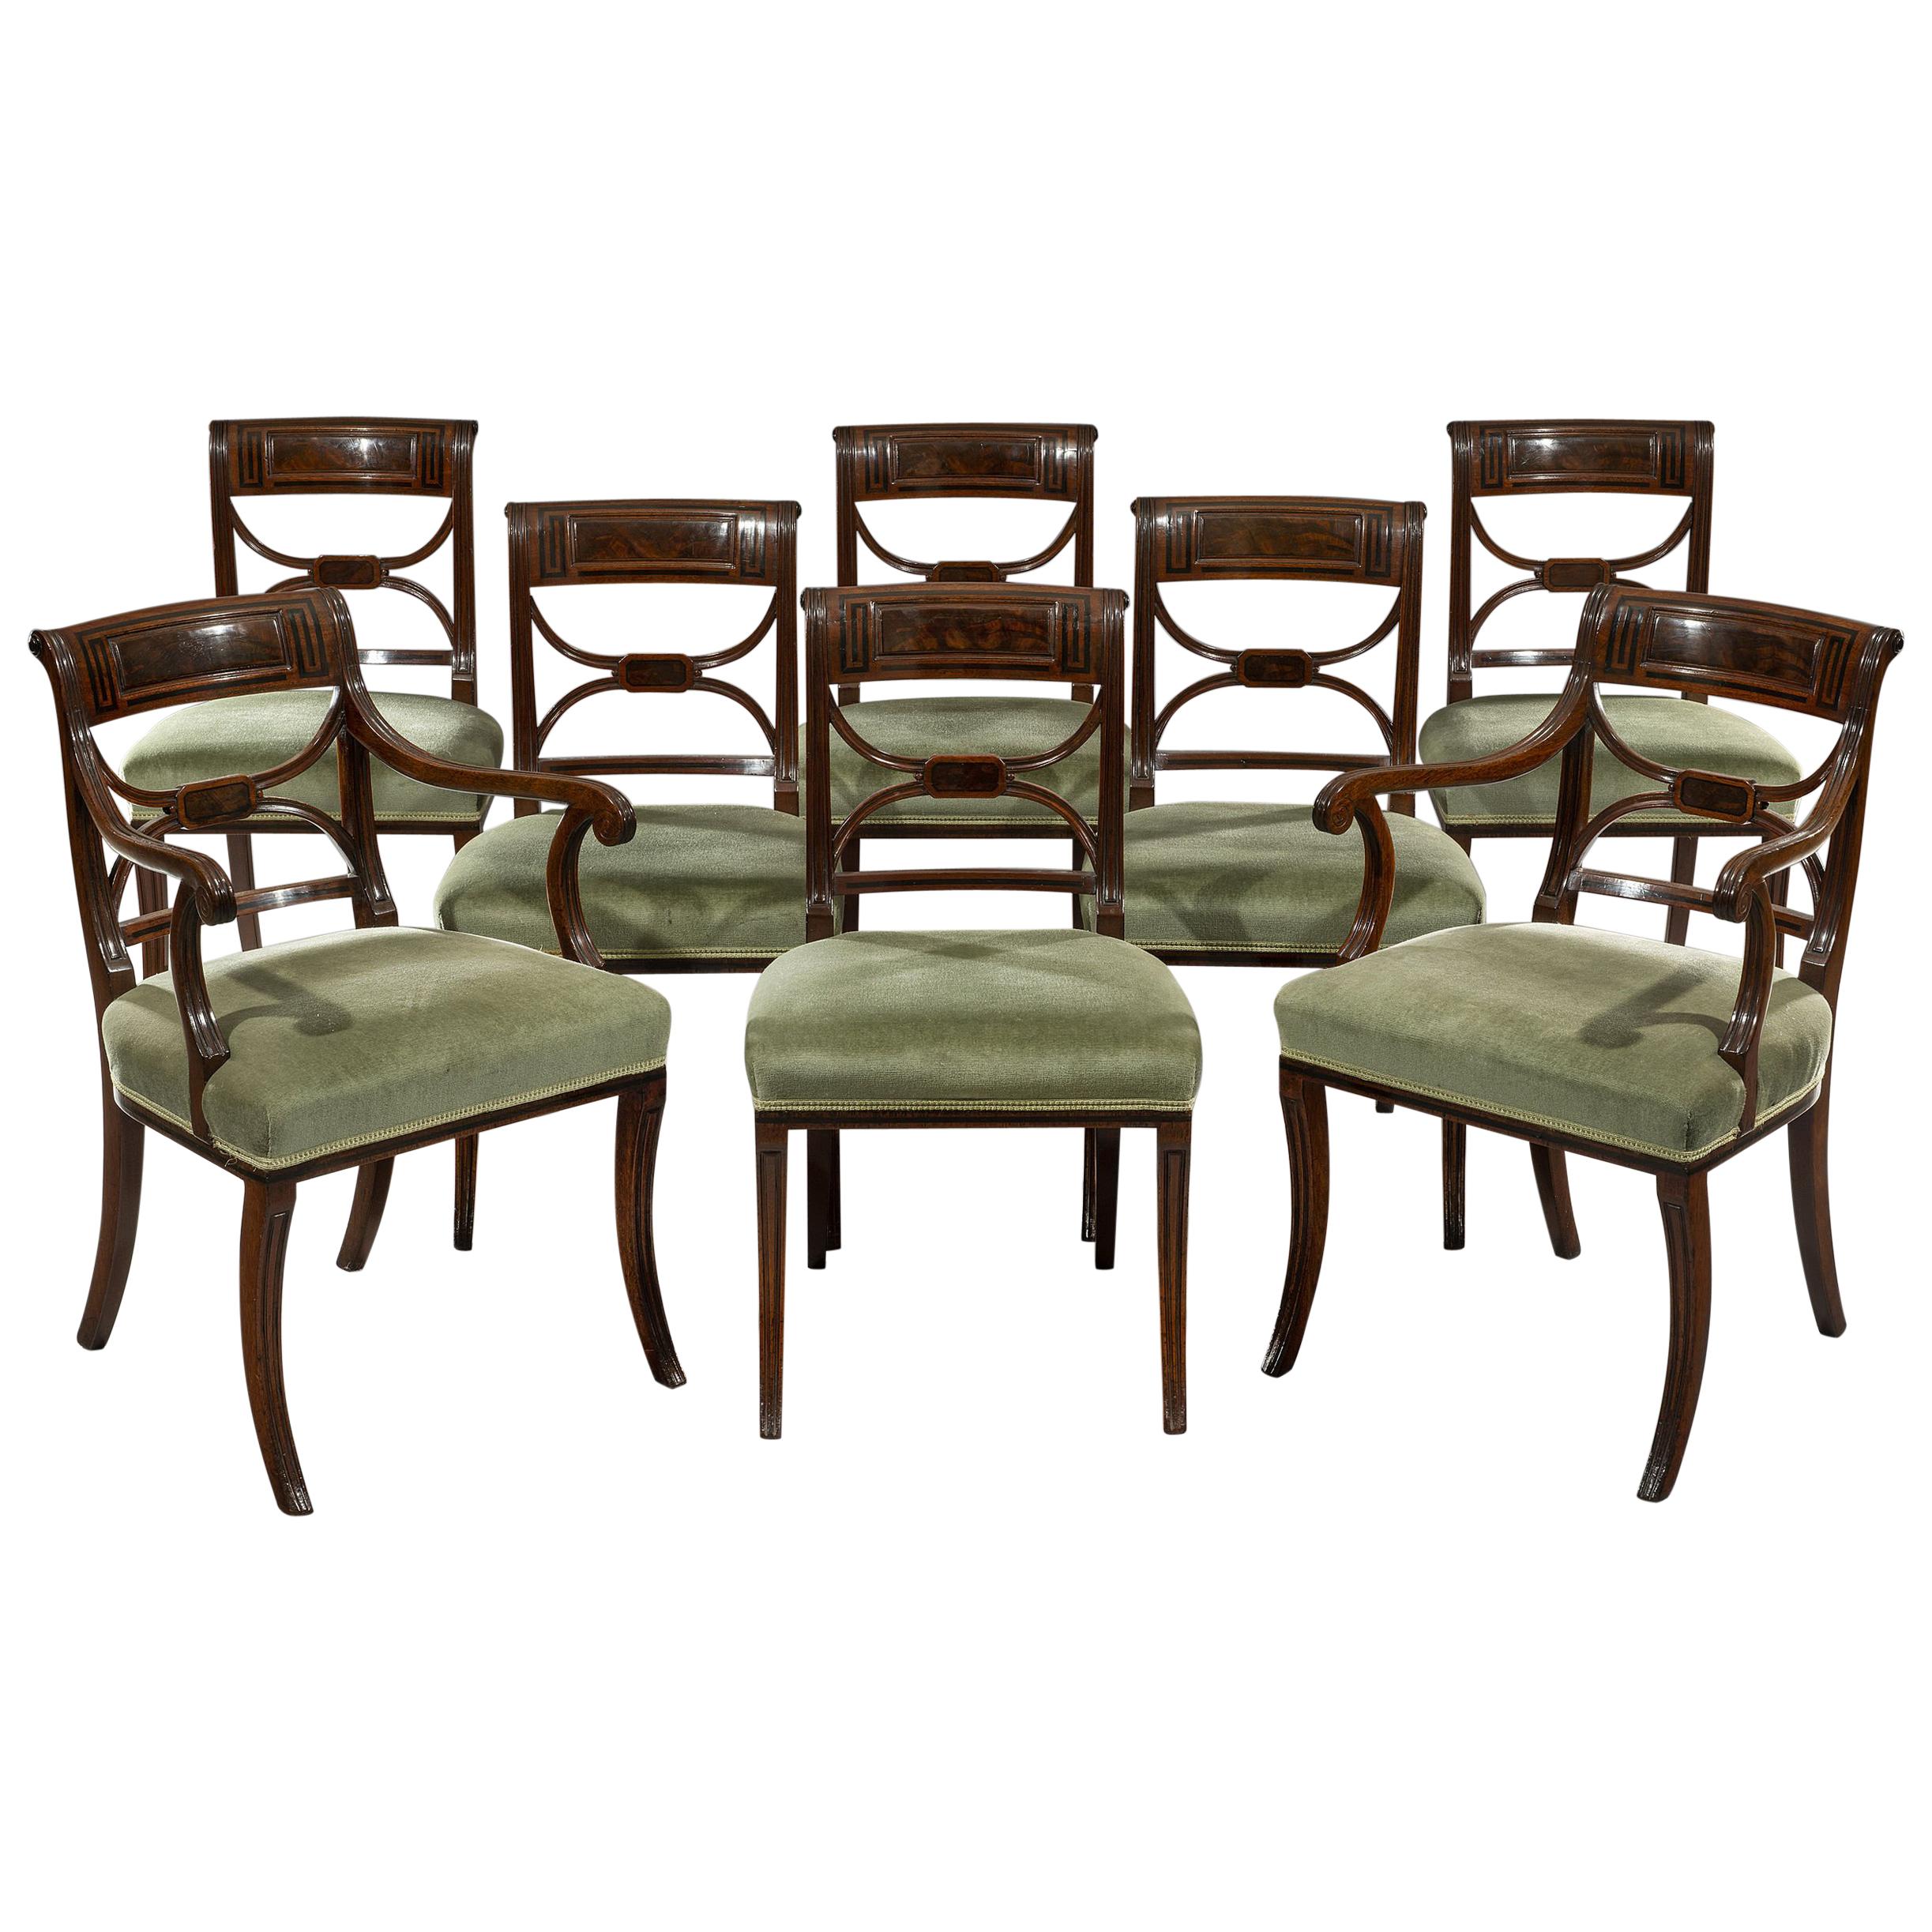 Regency Period Set of Eight Mahogany and Ebony Inlaid Dining Chairs For Sale